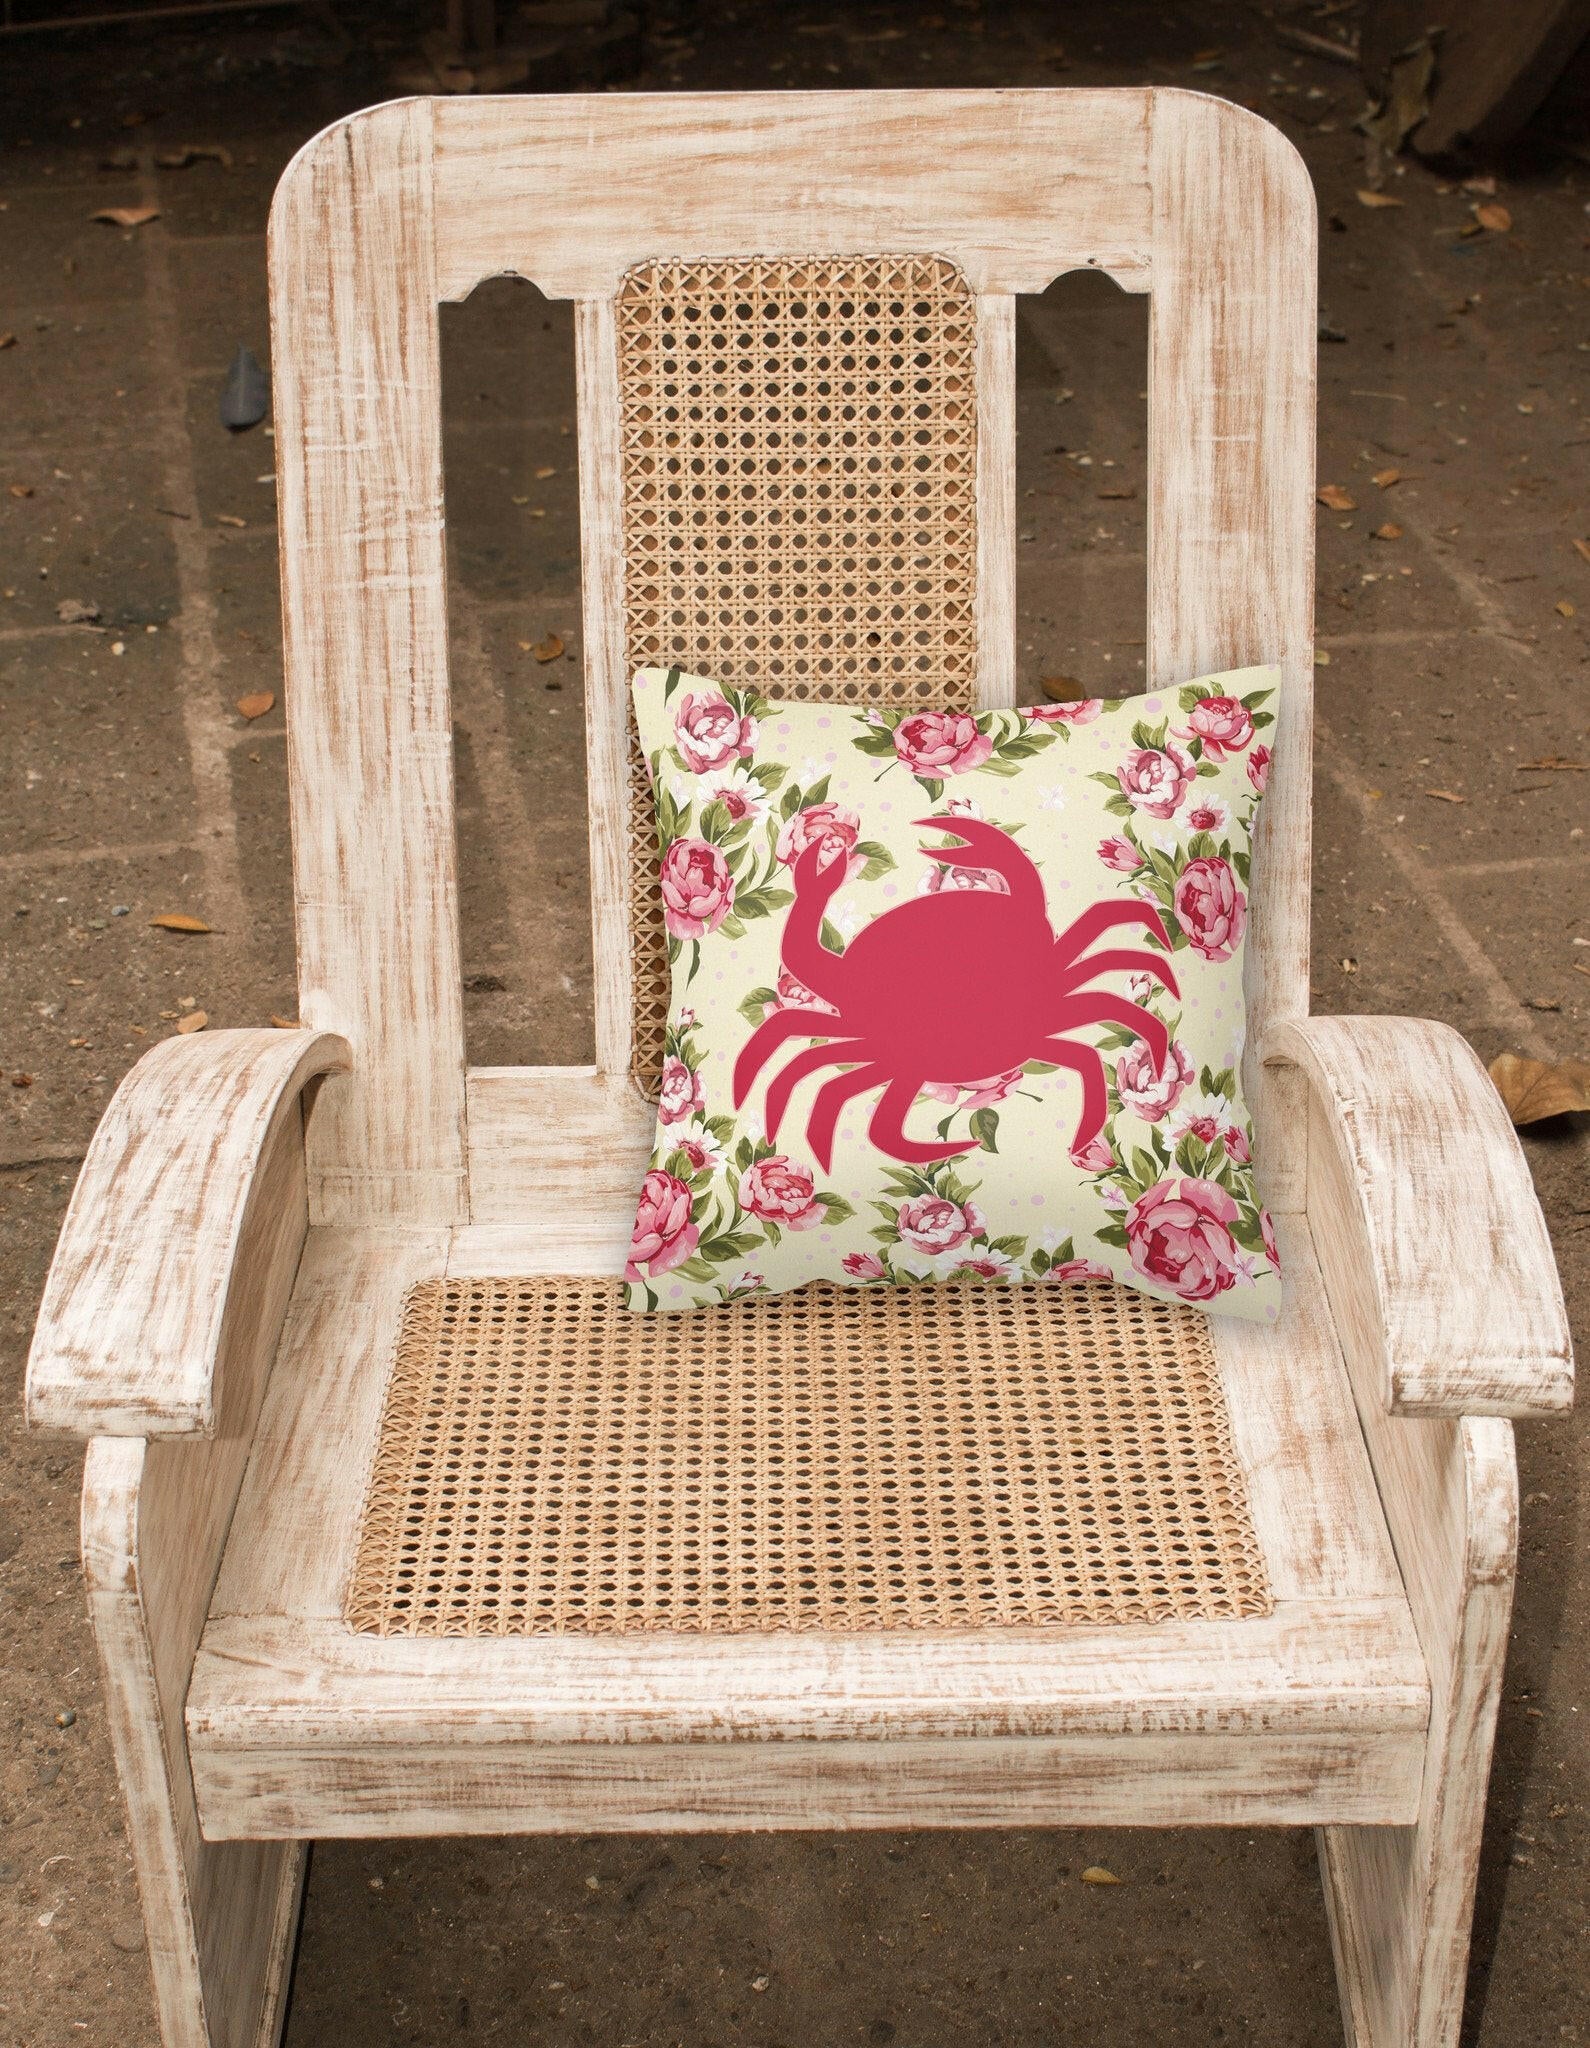 Crab Shabby Chic Yellow Roses  Fabric Decorative Pillow BB1024-RS-YW-PW1414 - the-store.com